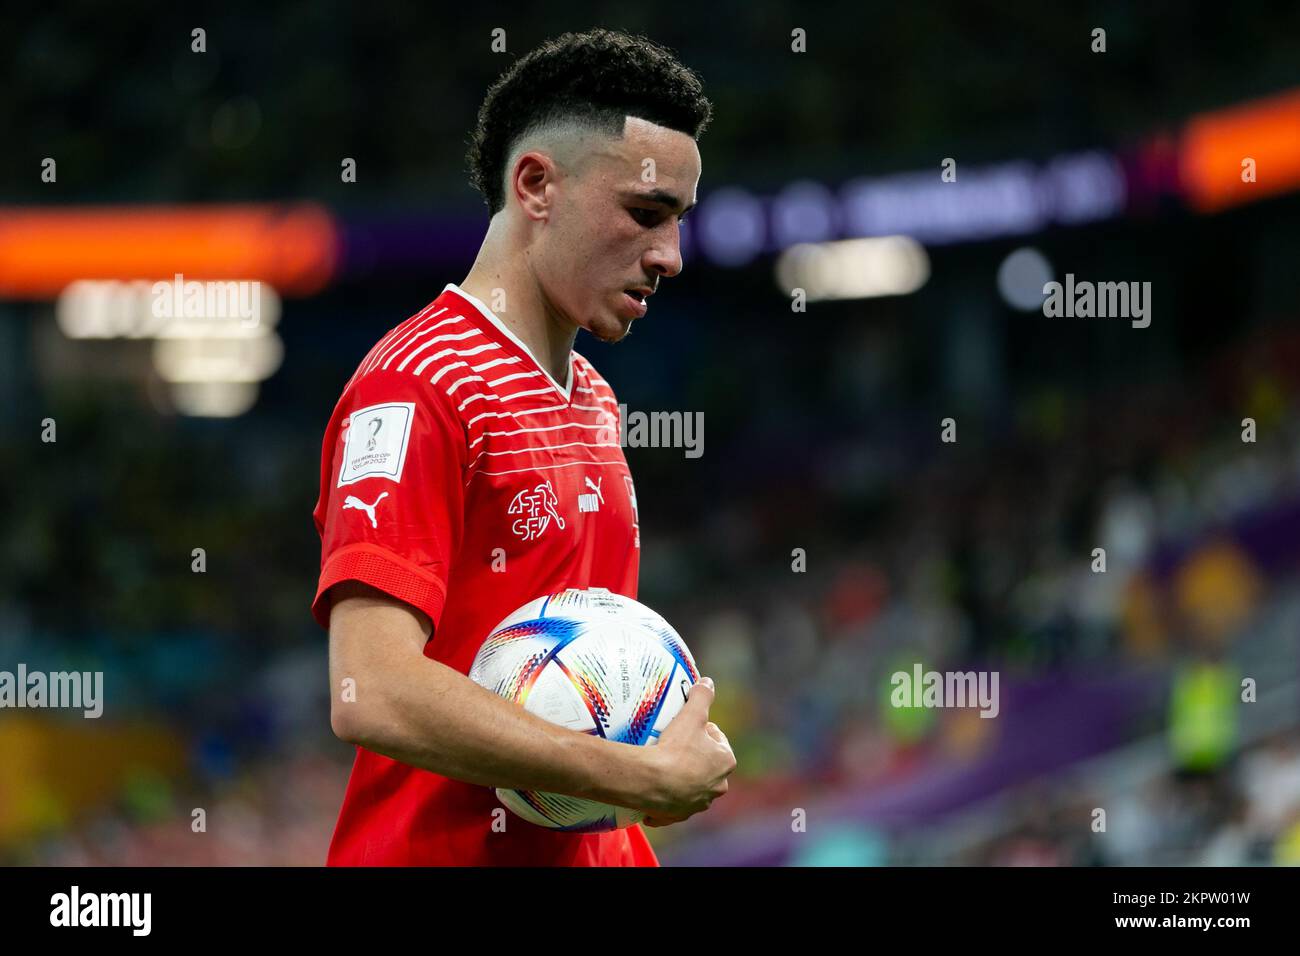 DOHA, QATAR - NOVEMBER 28: Player of Switzerland Ruben Vargas during the FIFA World Cup Qatar 2022 group G match between Brazil and Switzerland at Stadium 974 on November 28, 2022 in Doha, Qatar. (Photo by Florencia Tan Jun/PxImages) Stock Photo